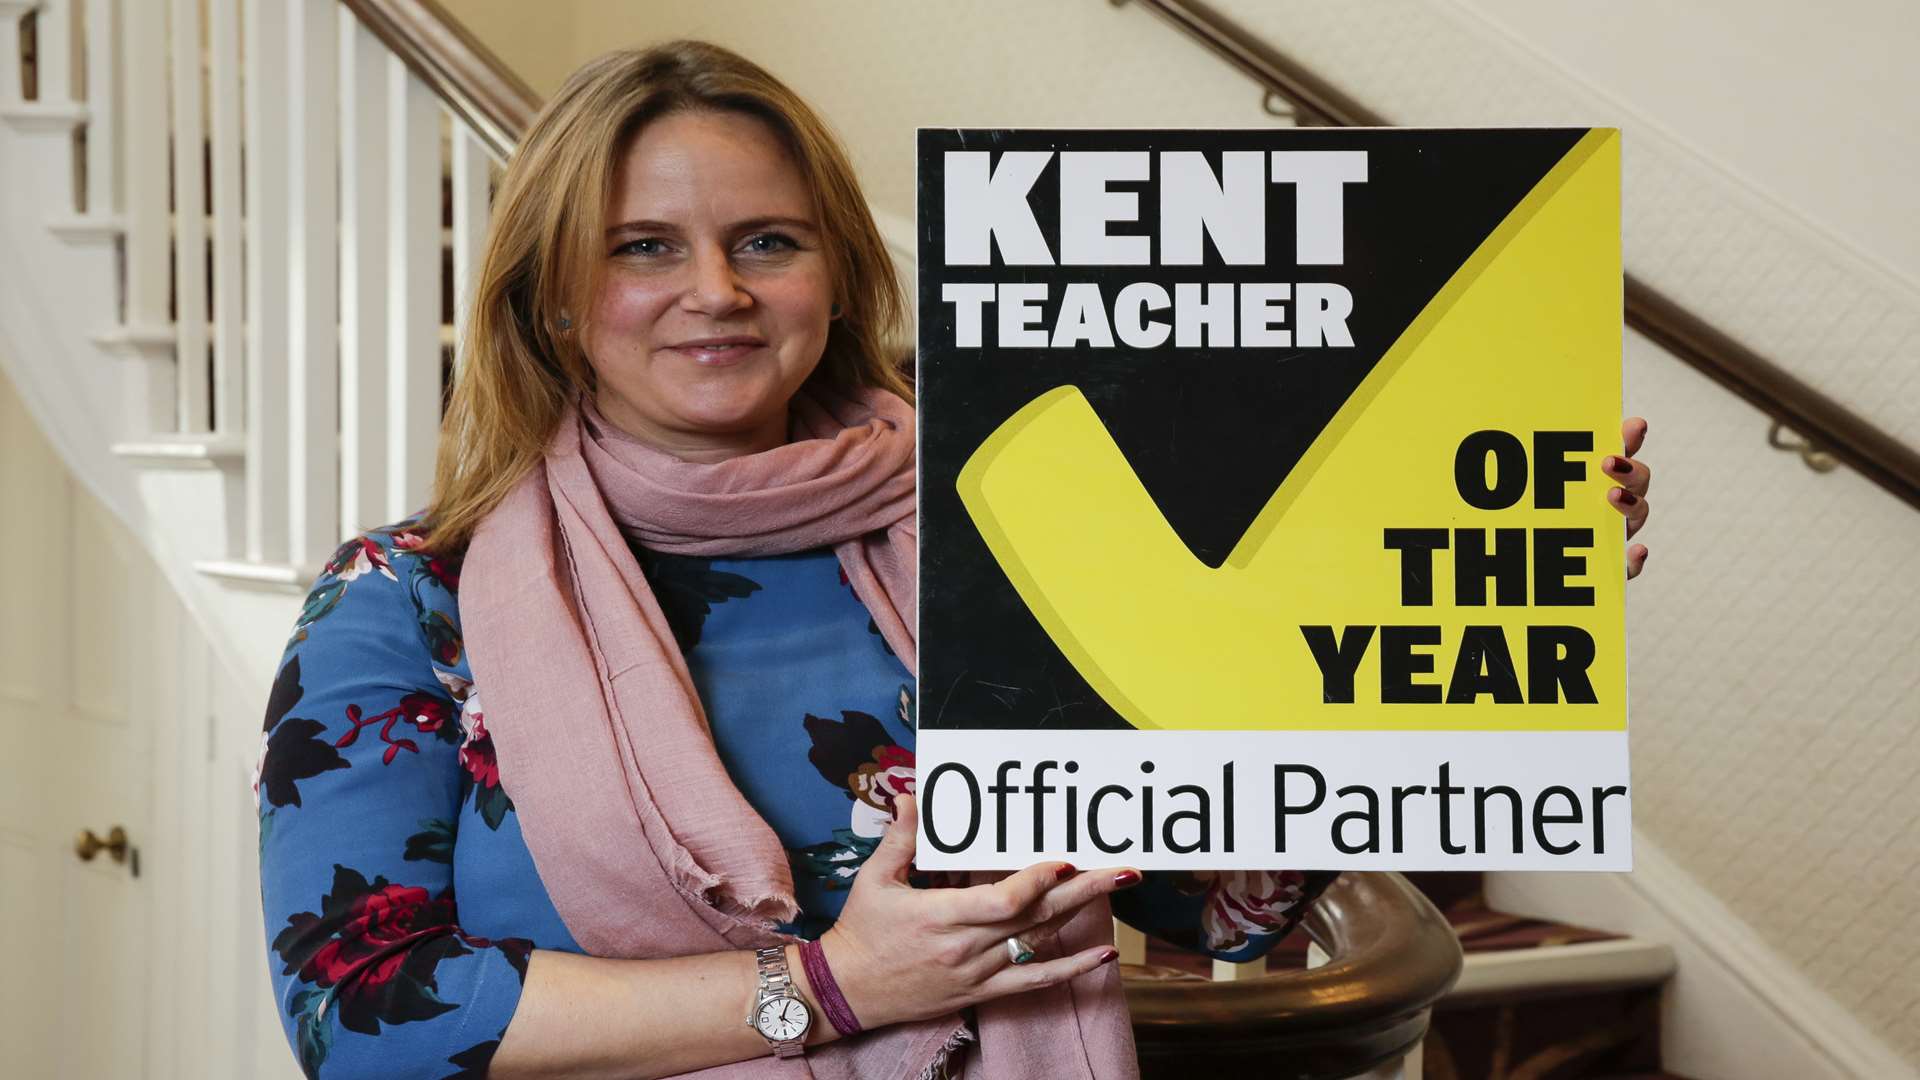 Sarah Bottle of Kent Libraries calls for Teacher of the Year nominations.